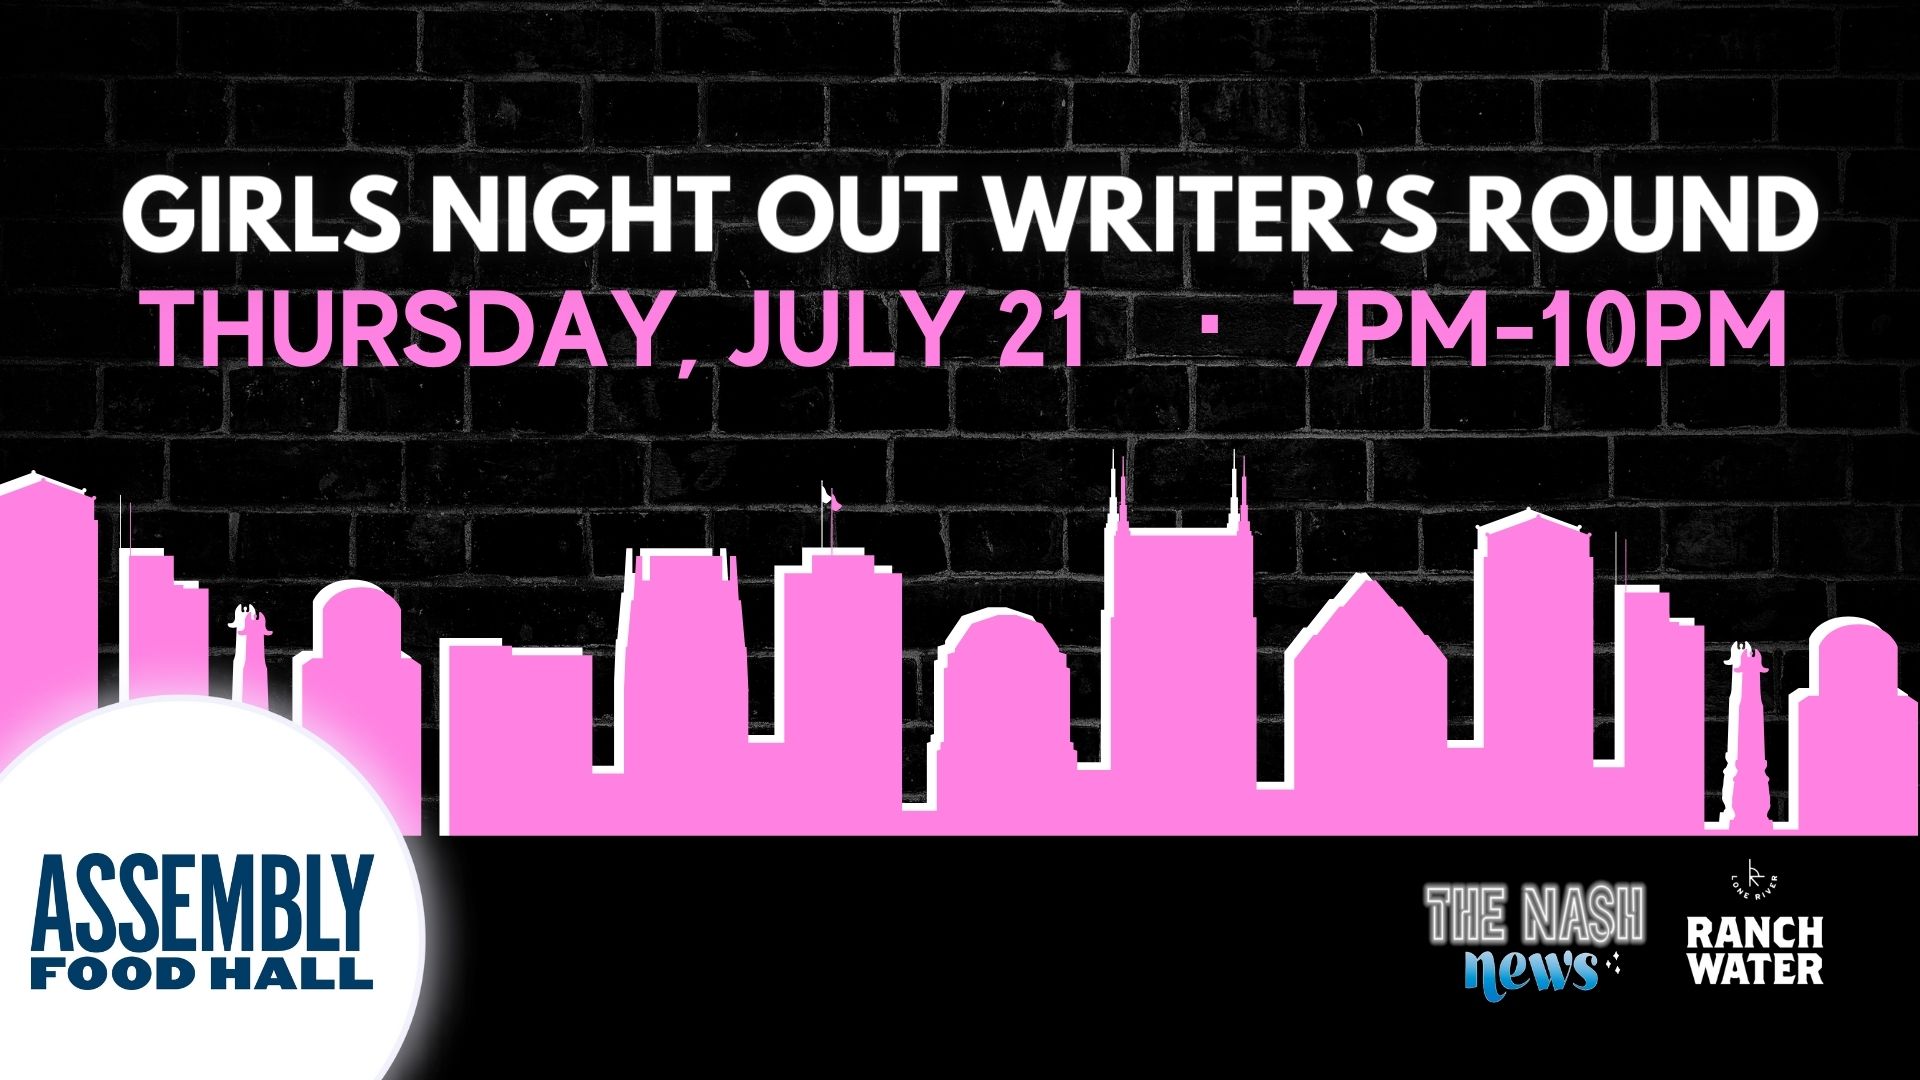 Promo image of The Nash News Presents Girls Night Out Writer’s Round